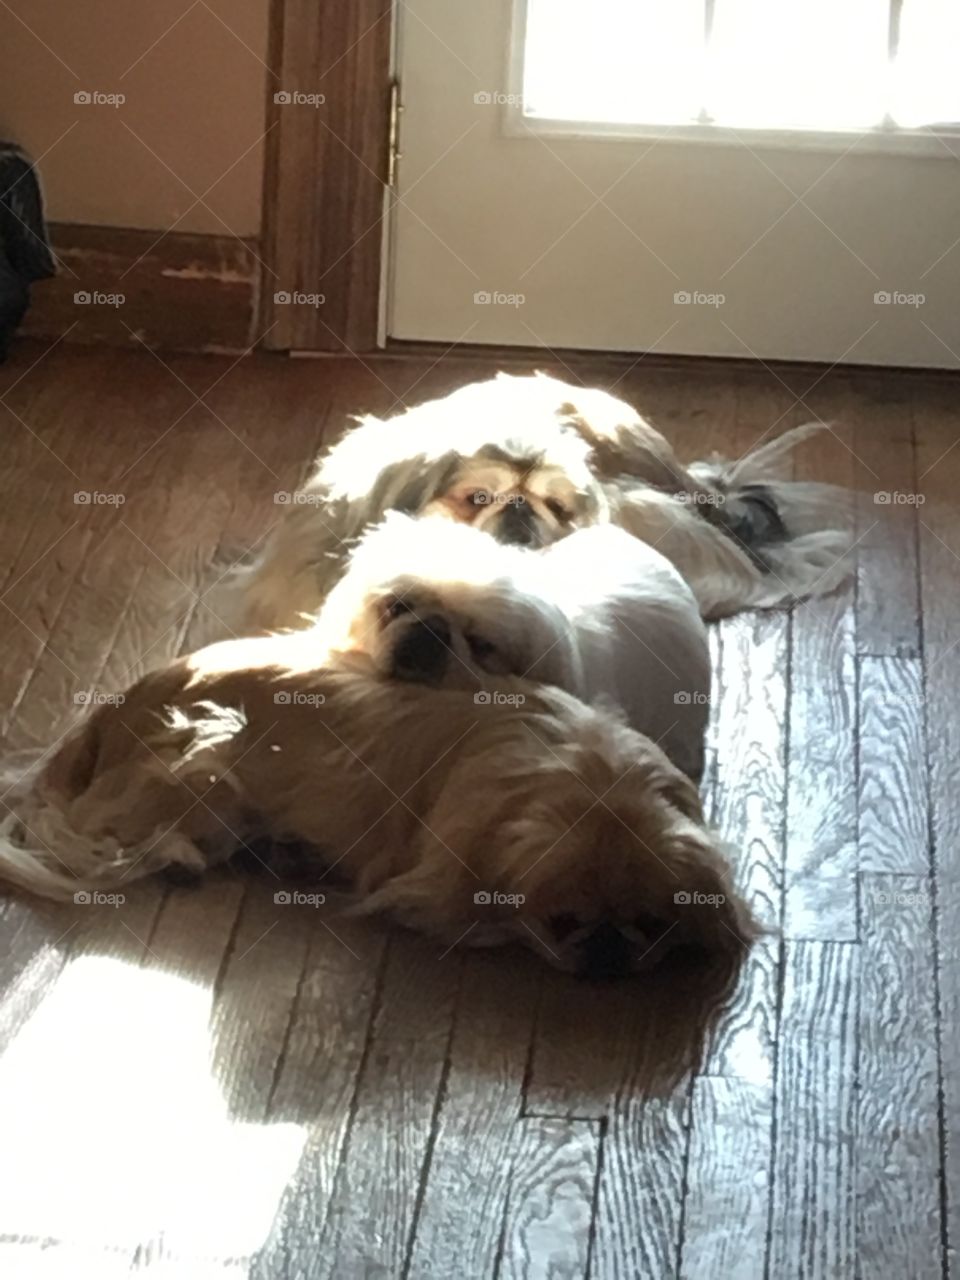 Three dogs in a row